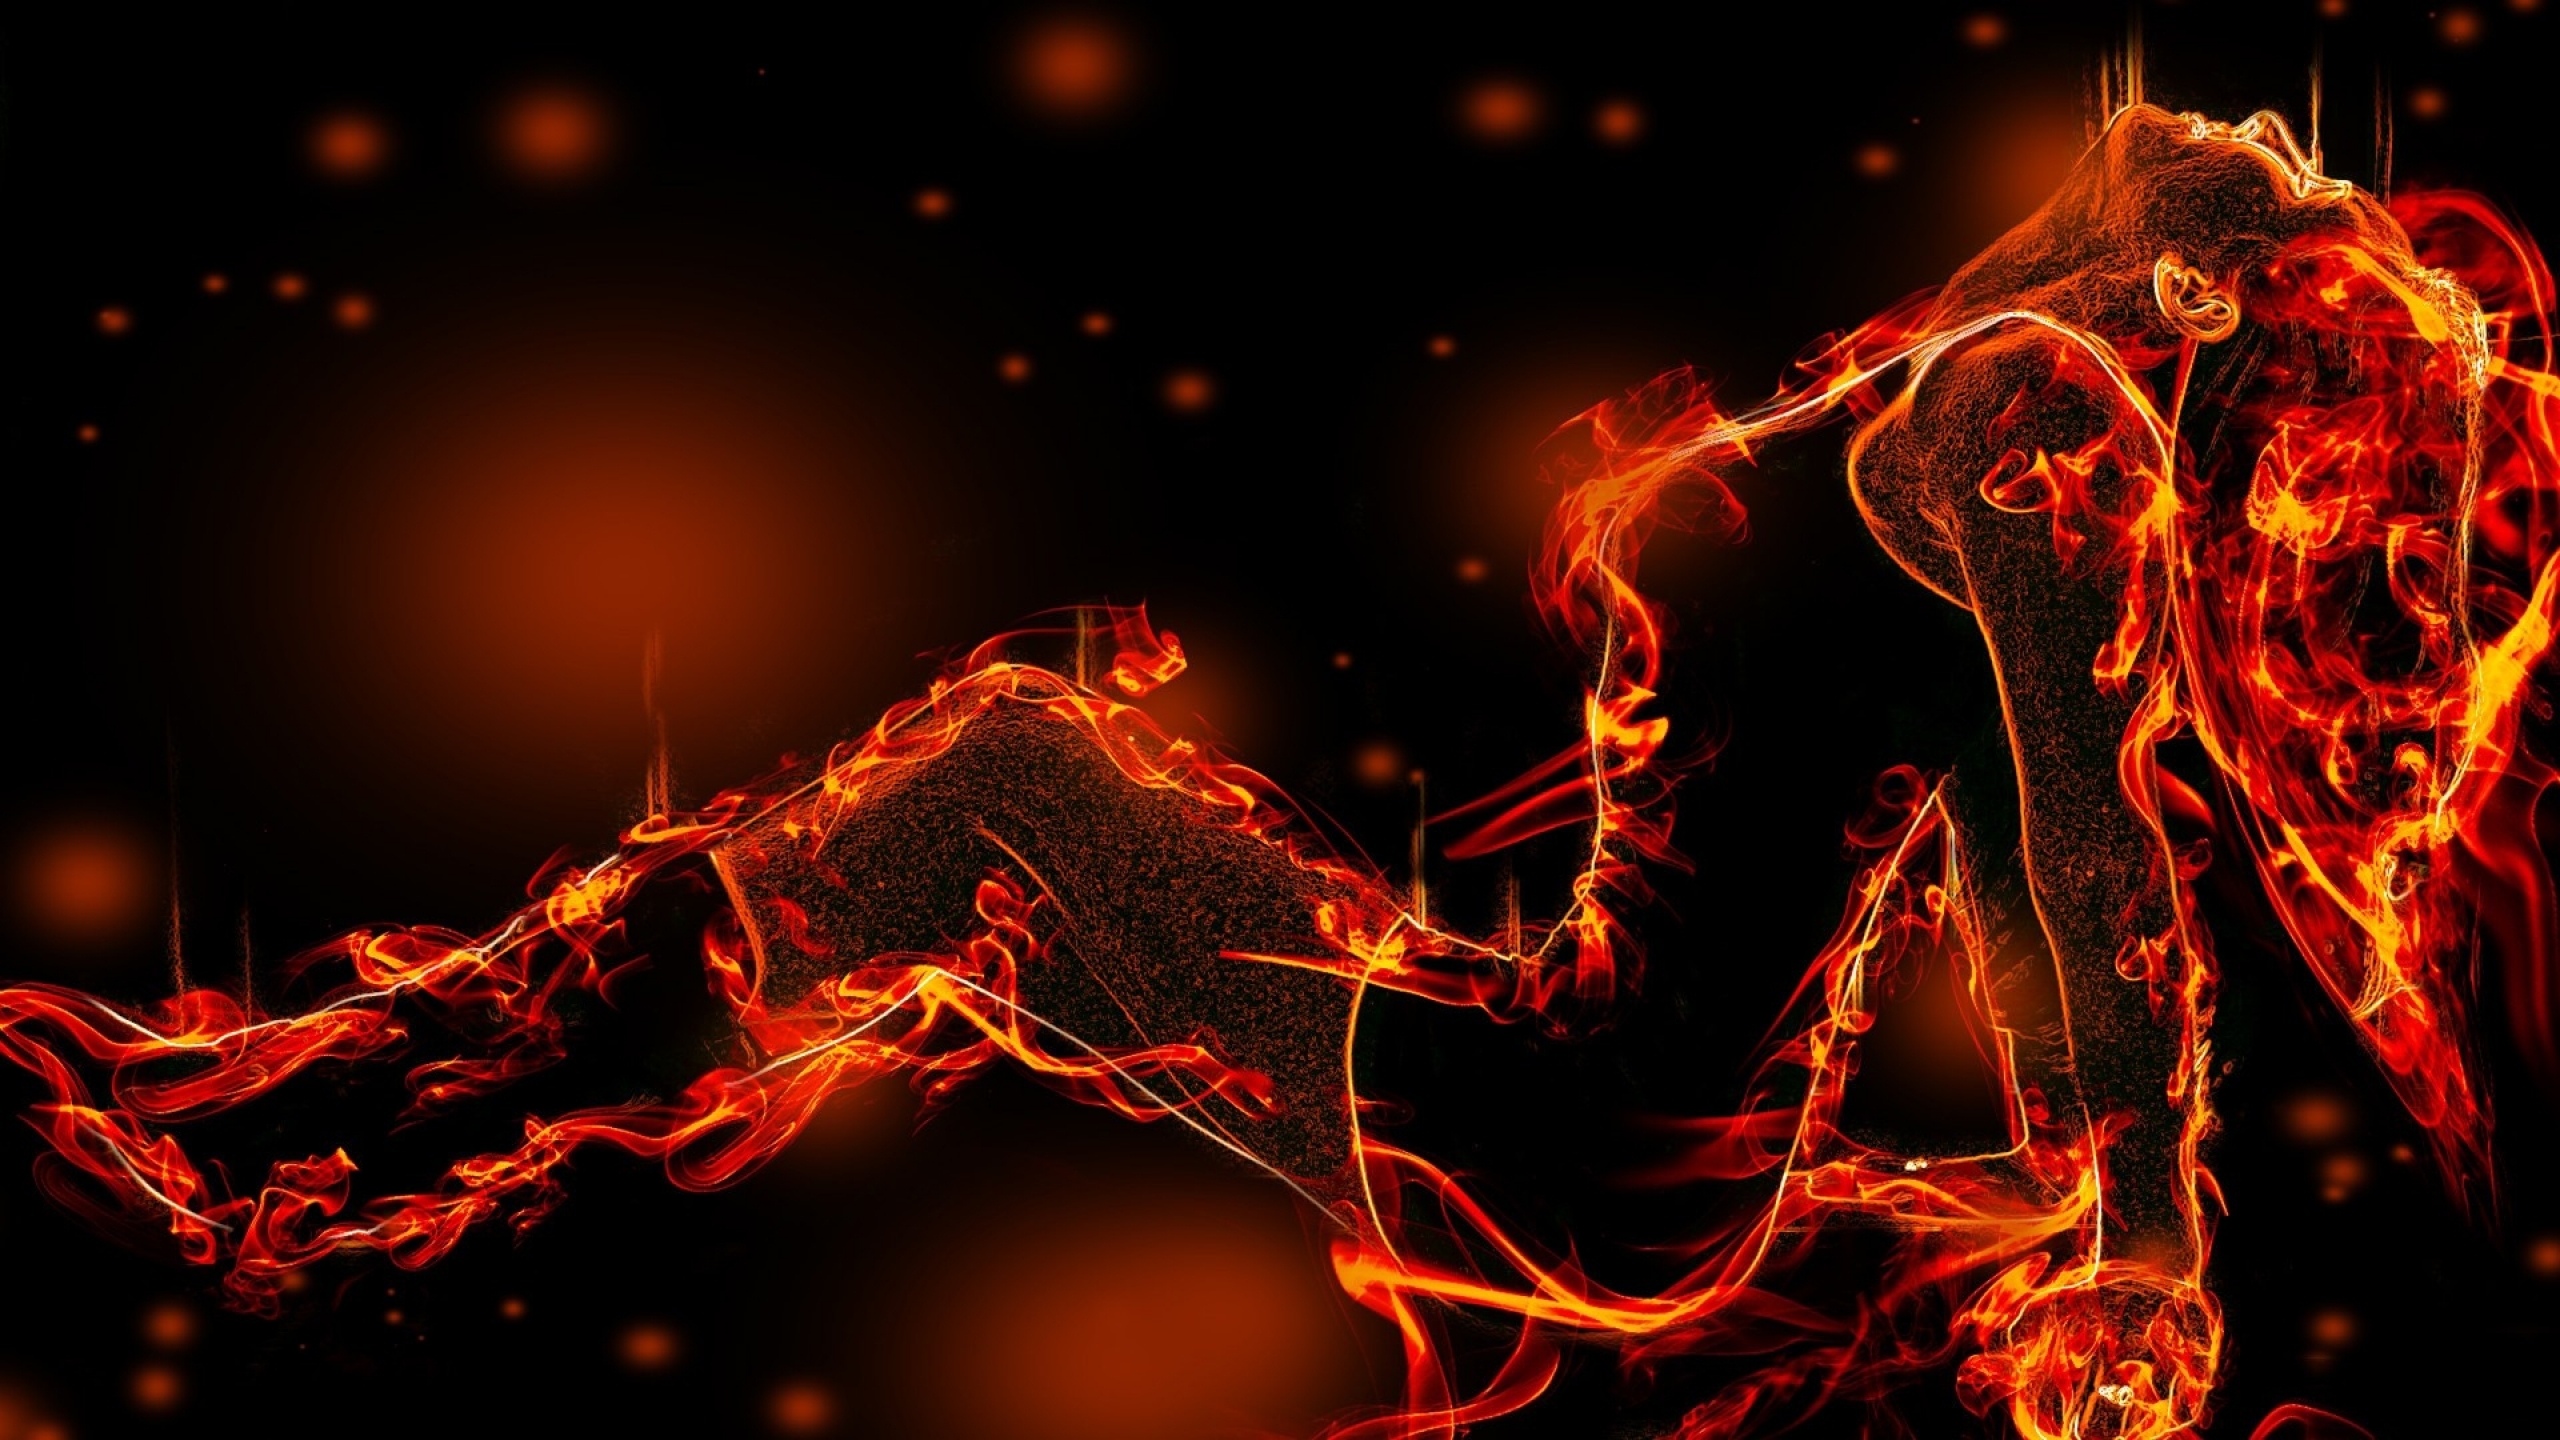 Red Fire Rings Fantasy Art On Black Clothes Wallpaper